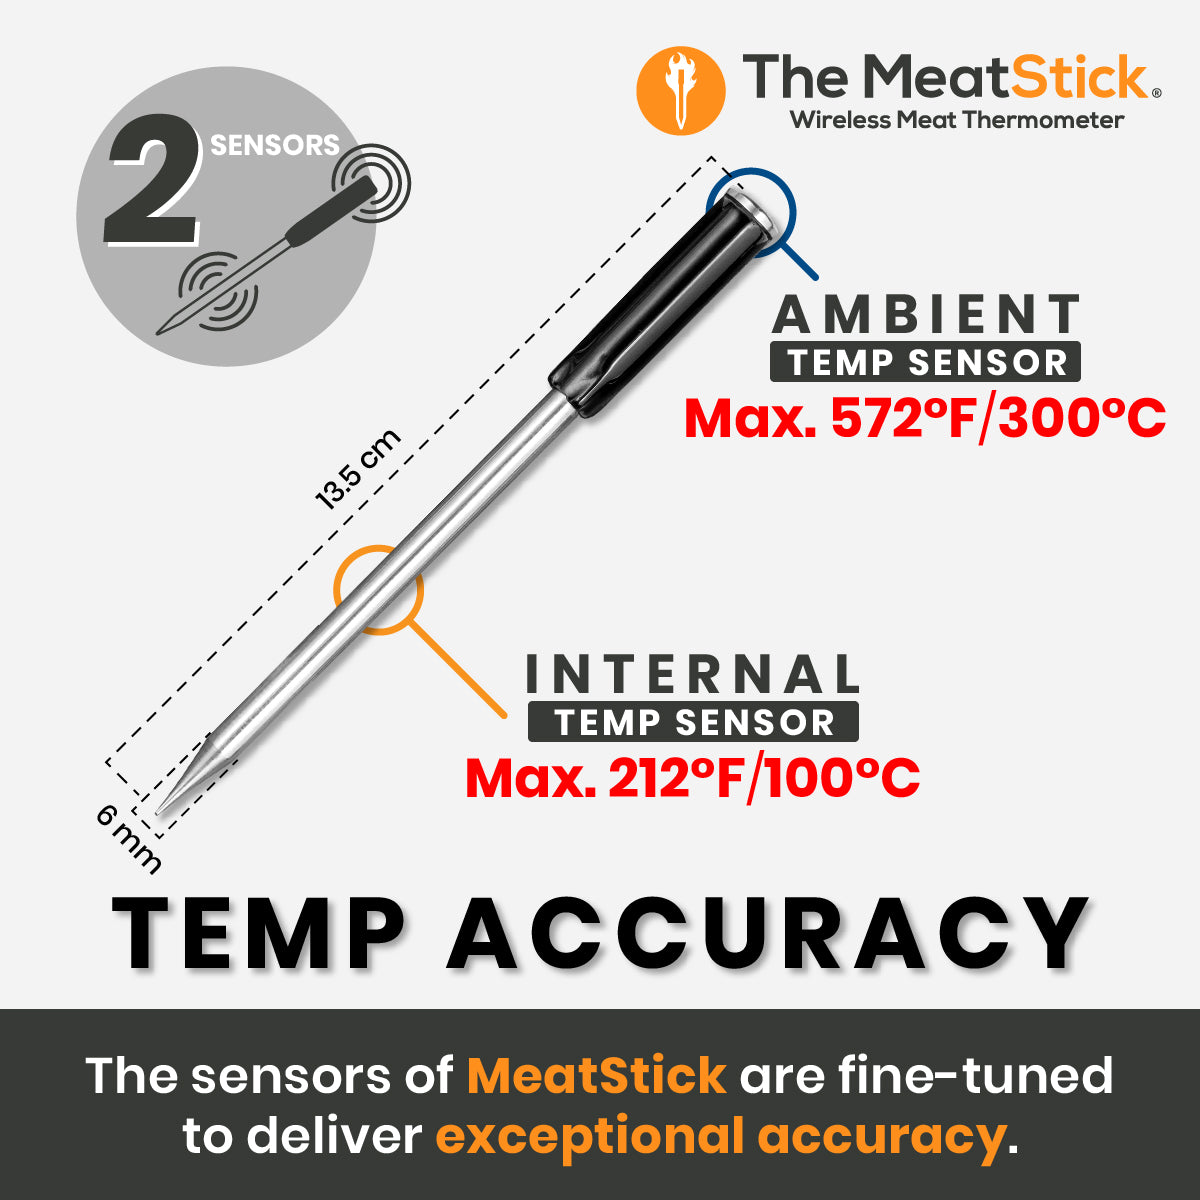 MixStick 500FT Wireless Meat Thermometer, Digital Food Thermometer